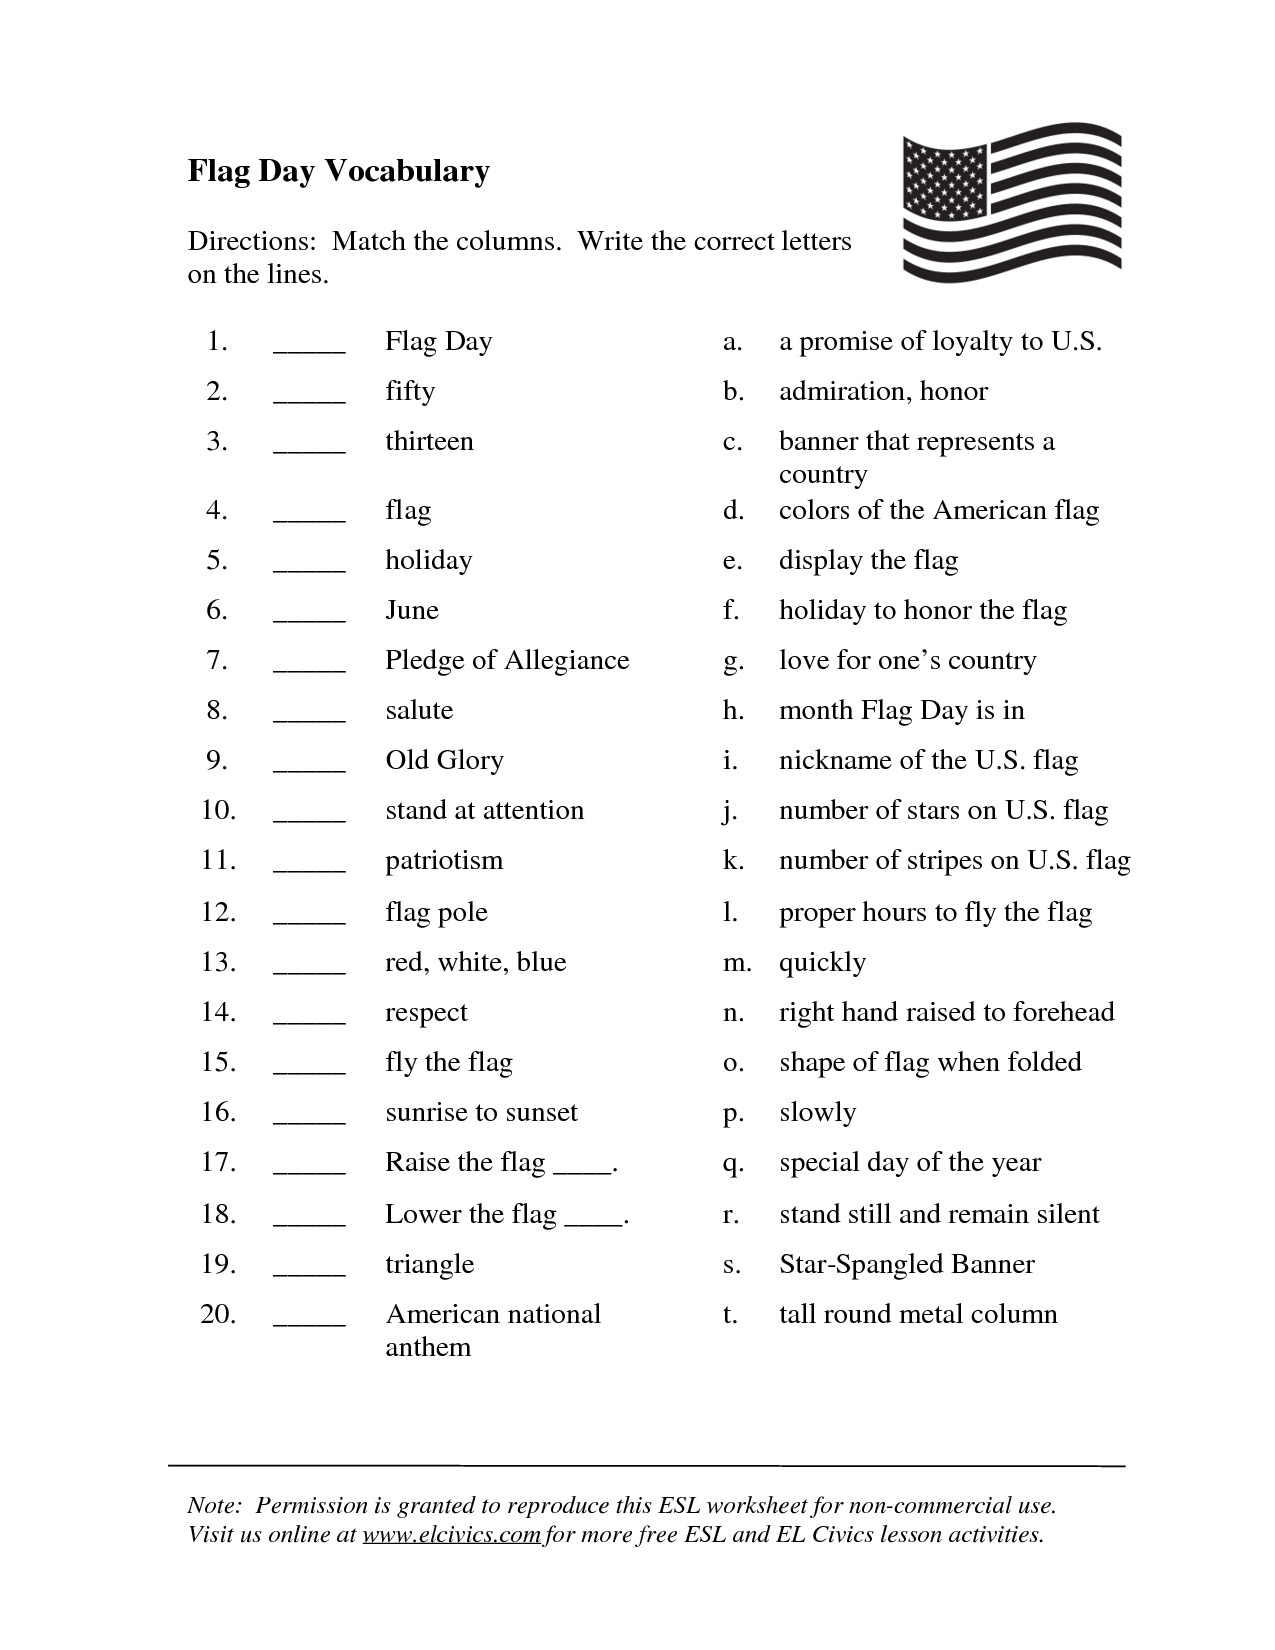 create-your-own-vocabulary-worksheets